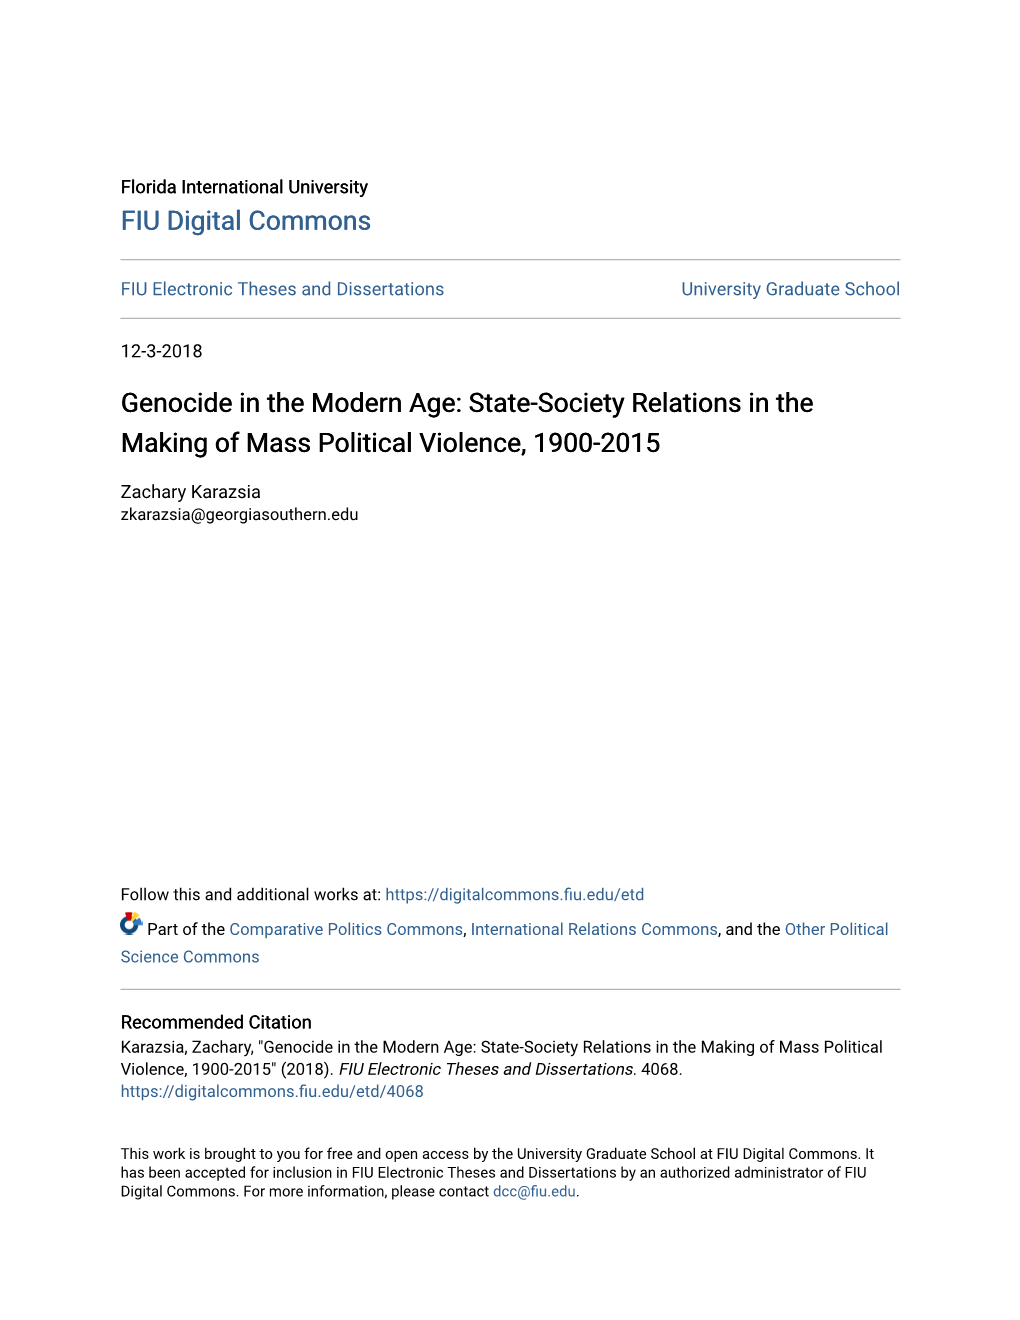 Genocide in the Modern Age: State-Society Relations in the Making of Mass Political Violence, 1900-2015